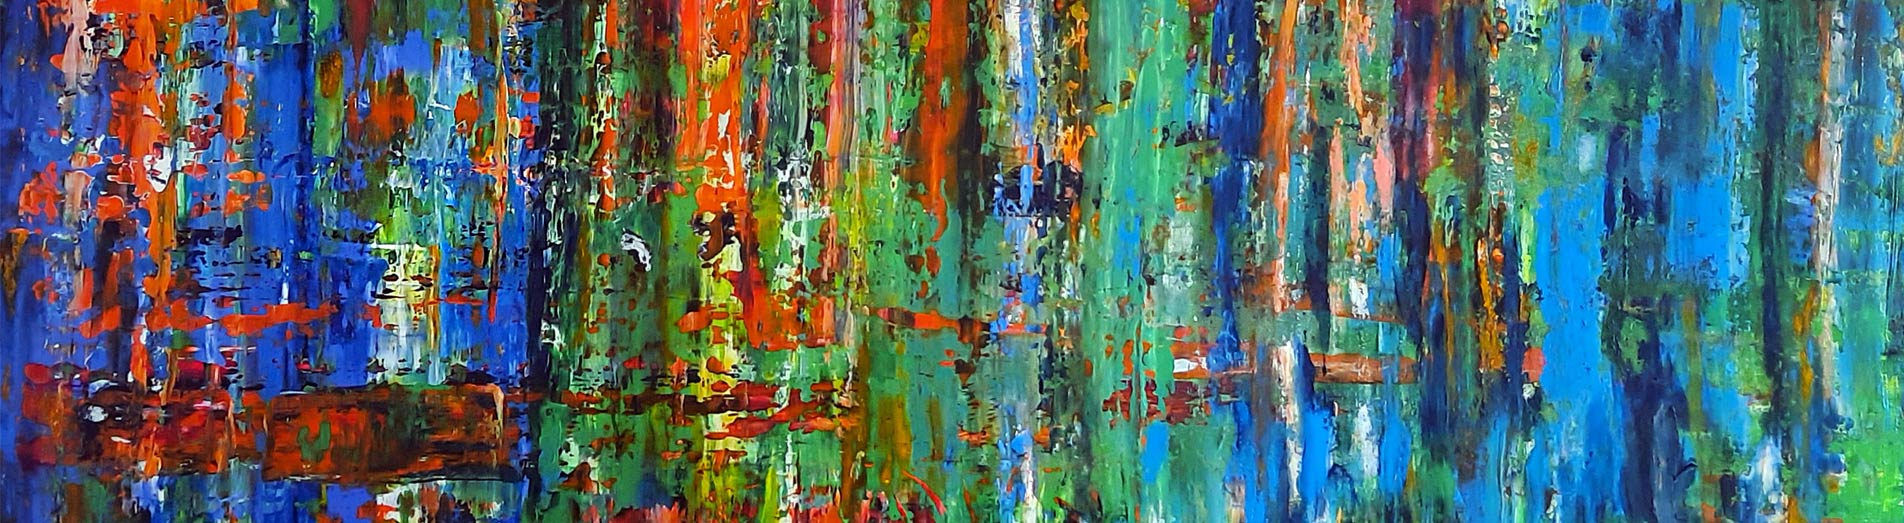 Myriad by Patrick Joosten abstract painter